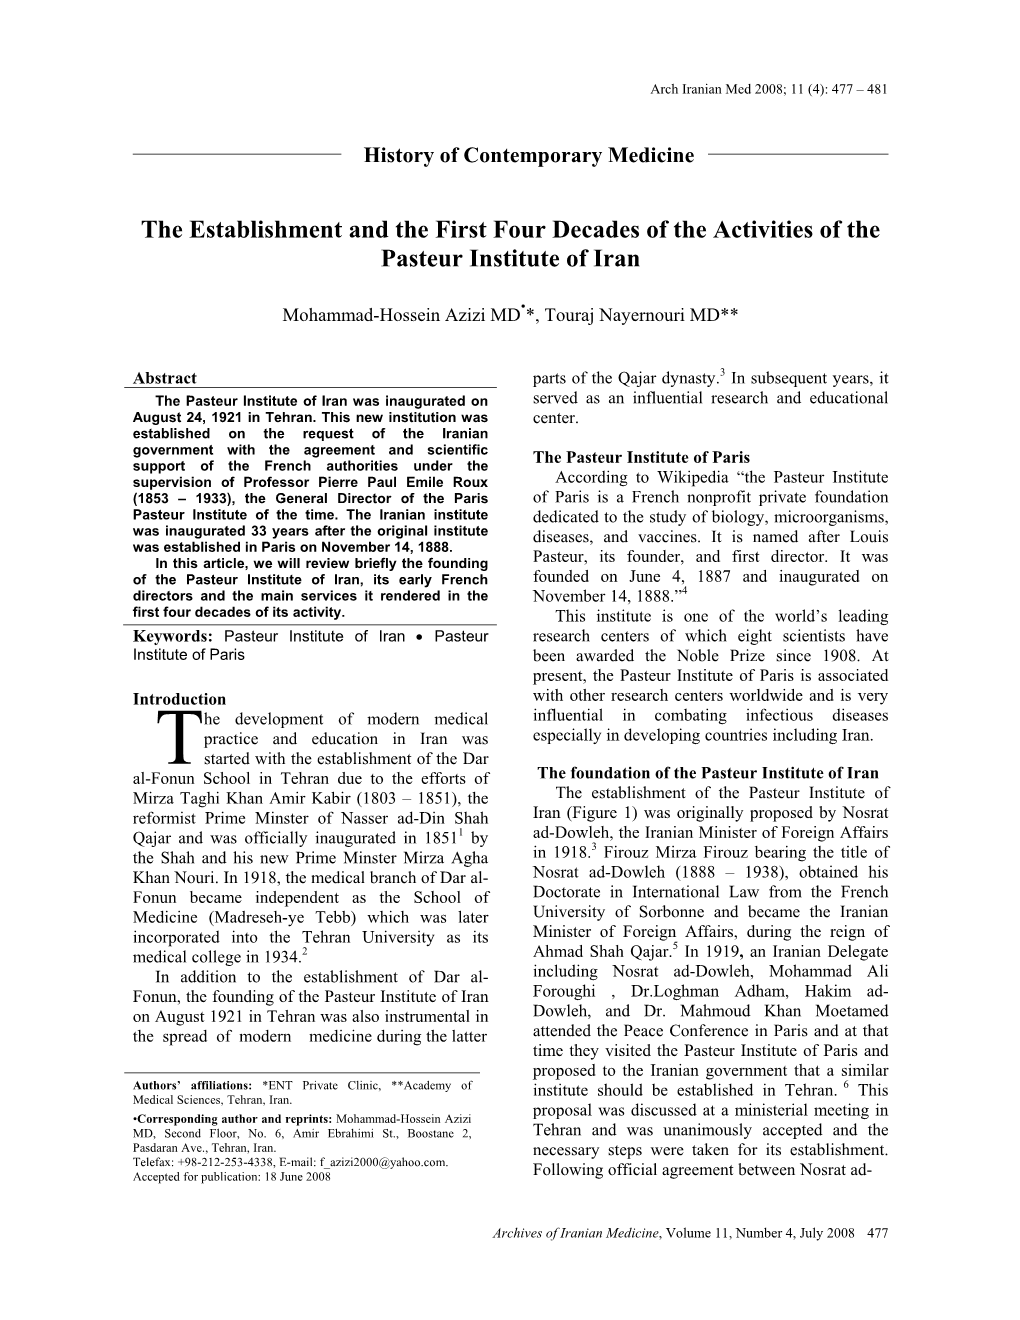 The Establishment and the First Four Decades of the Activities of the Pasteur Institute of Iran